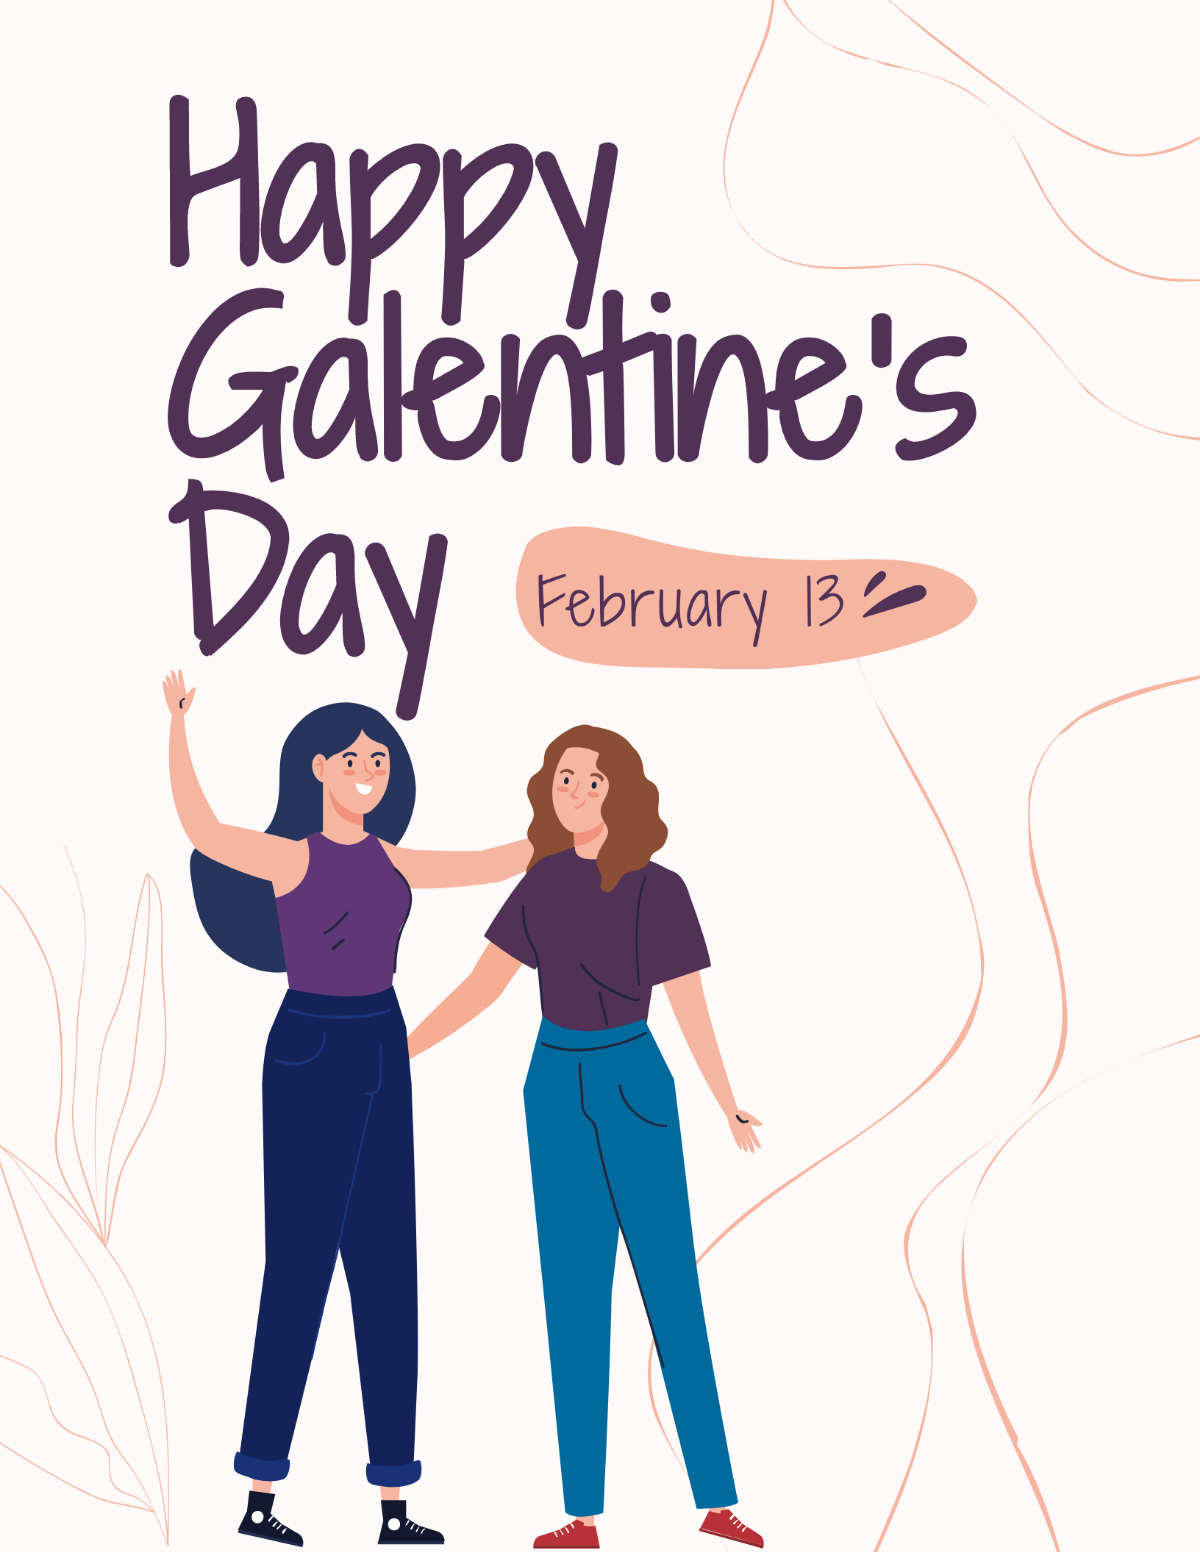 Free Happy Galentines Day Flyer Template